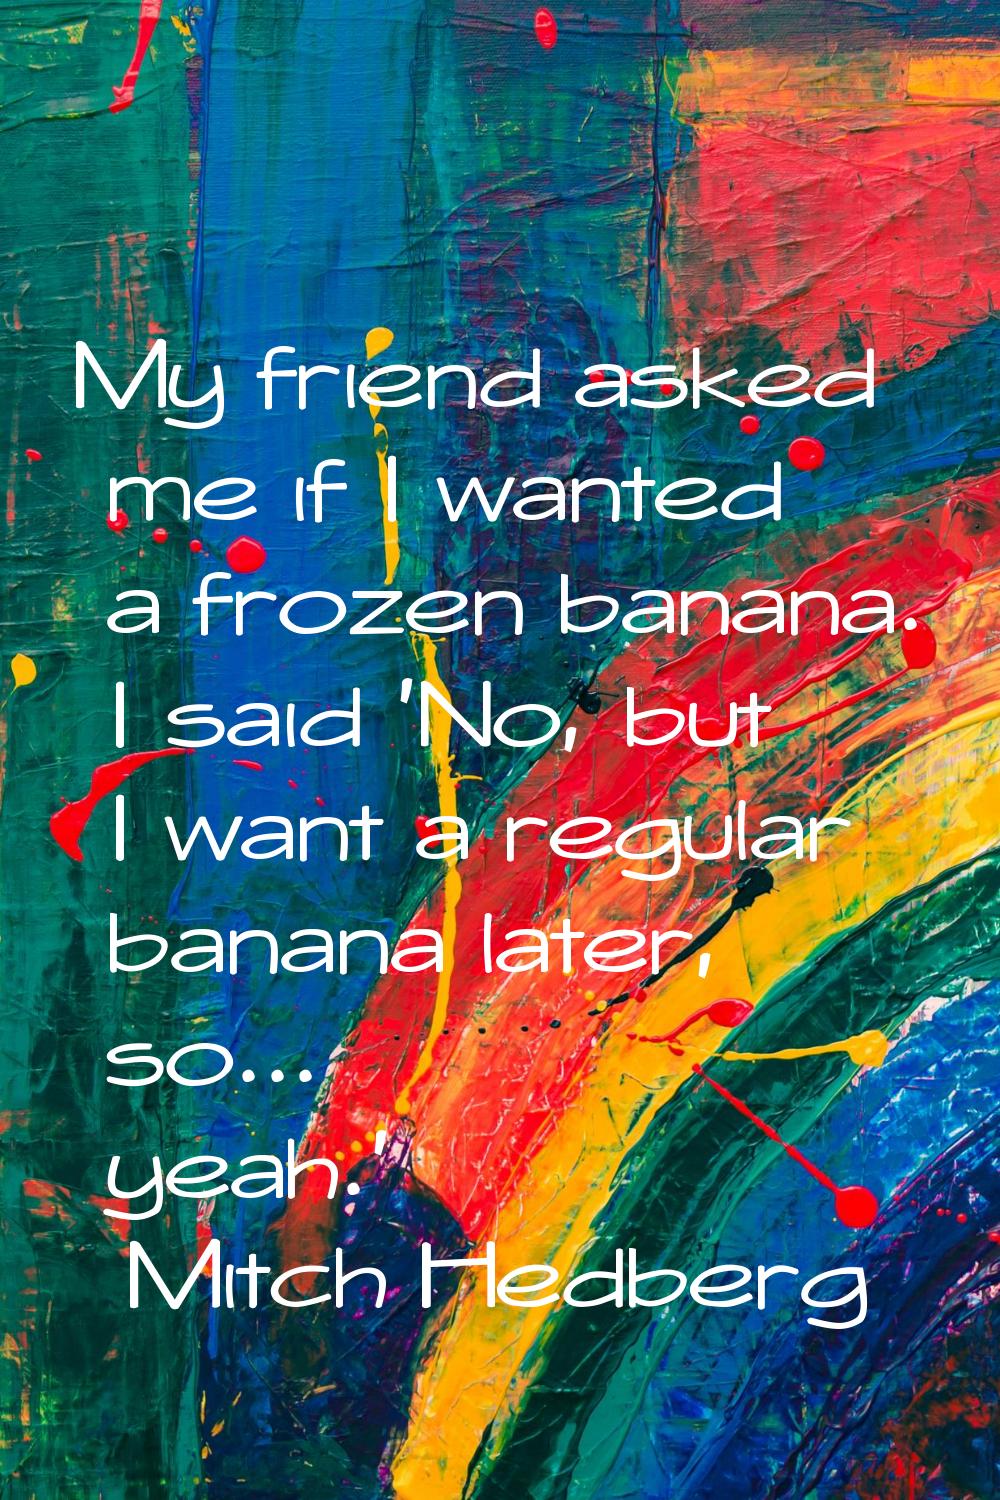 My friend asked me if I wanted a frozen banana. I said 'No, but I want a regular banana later, so..